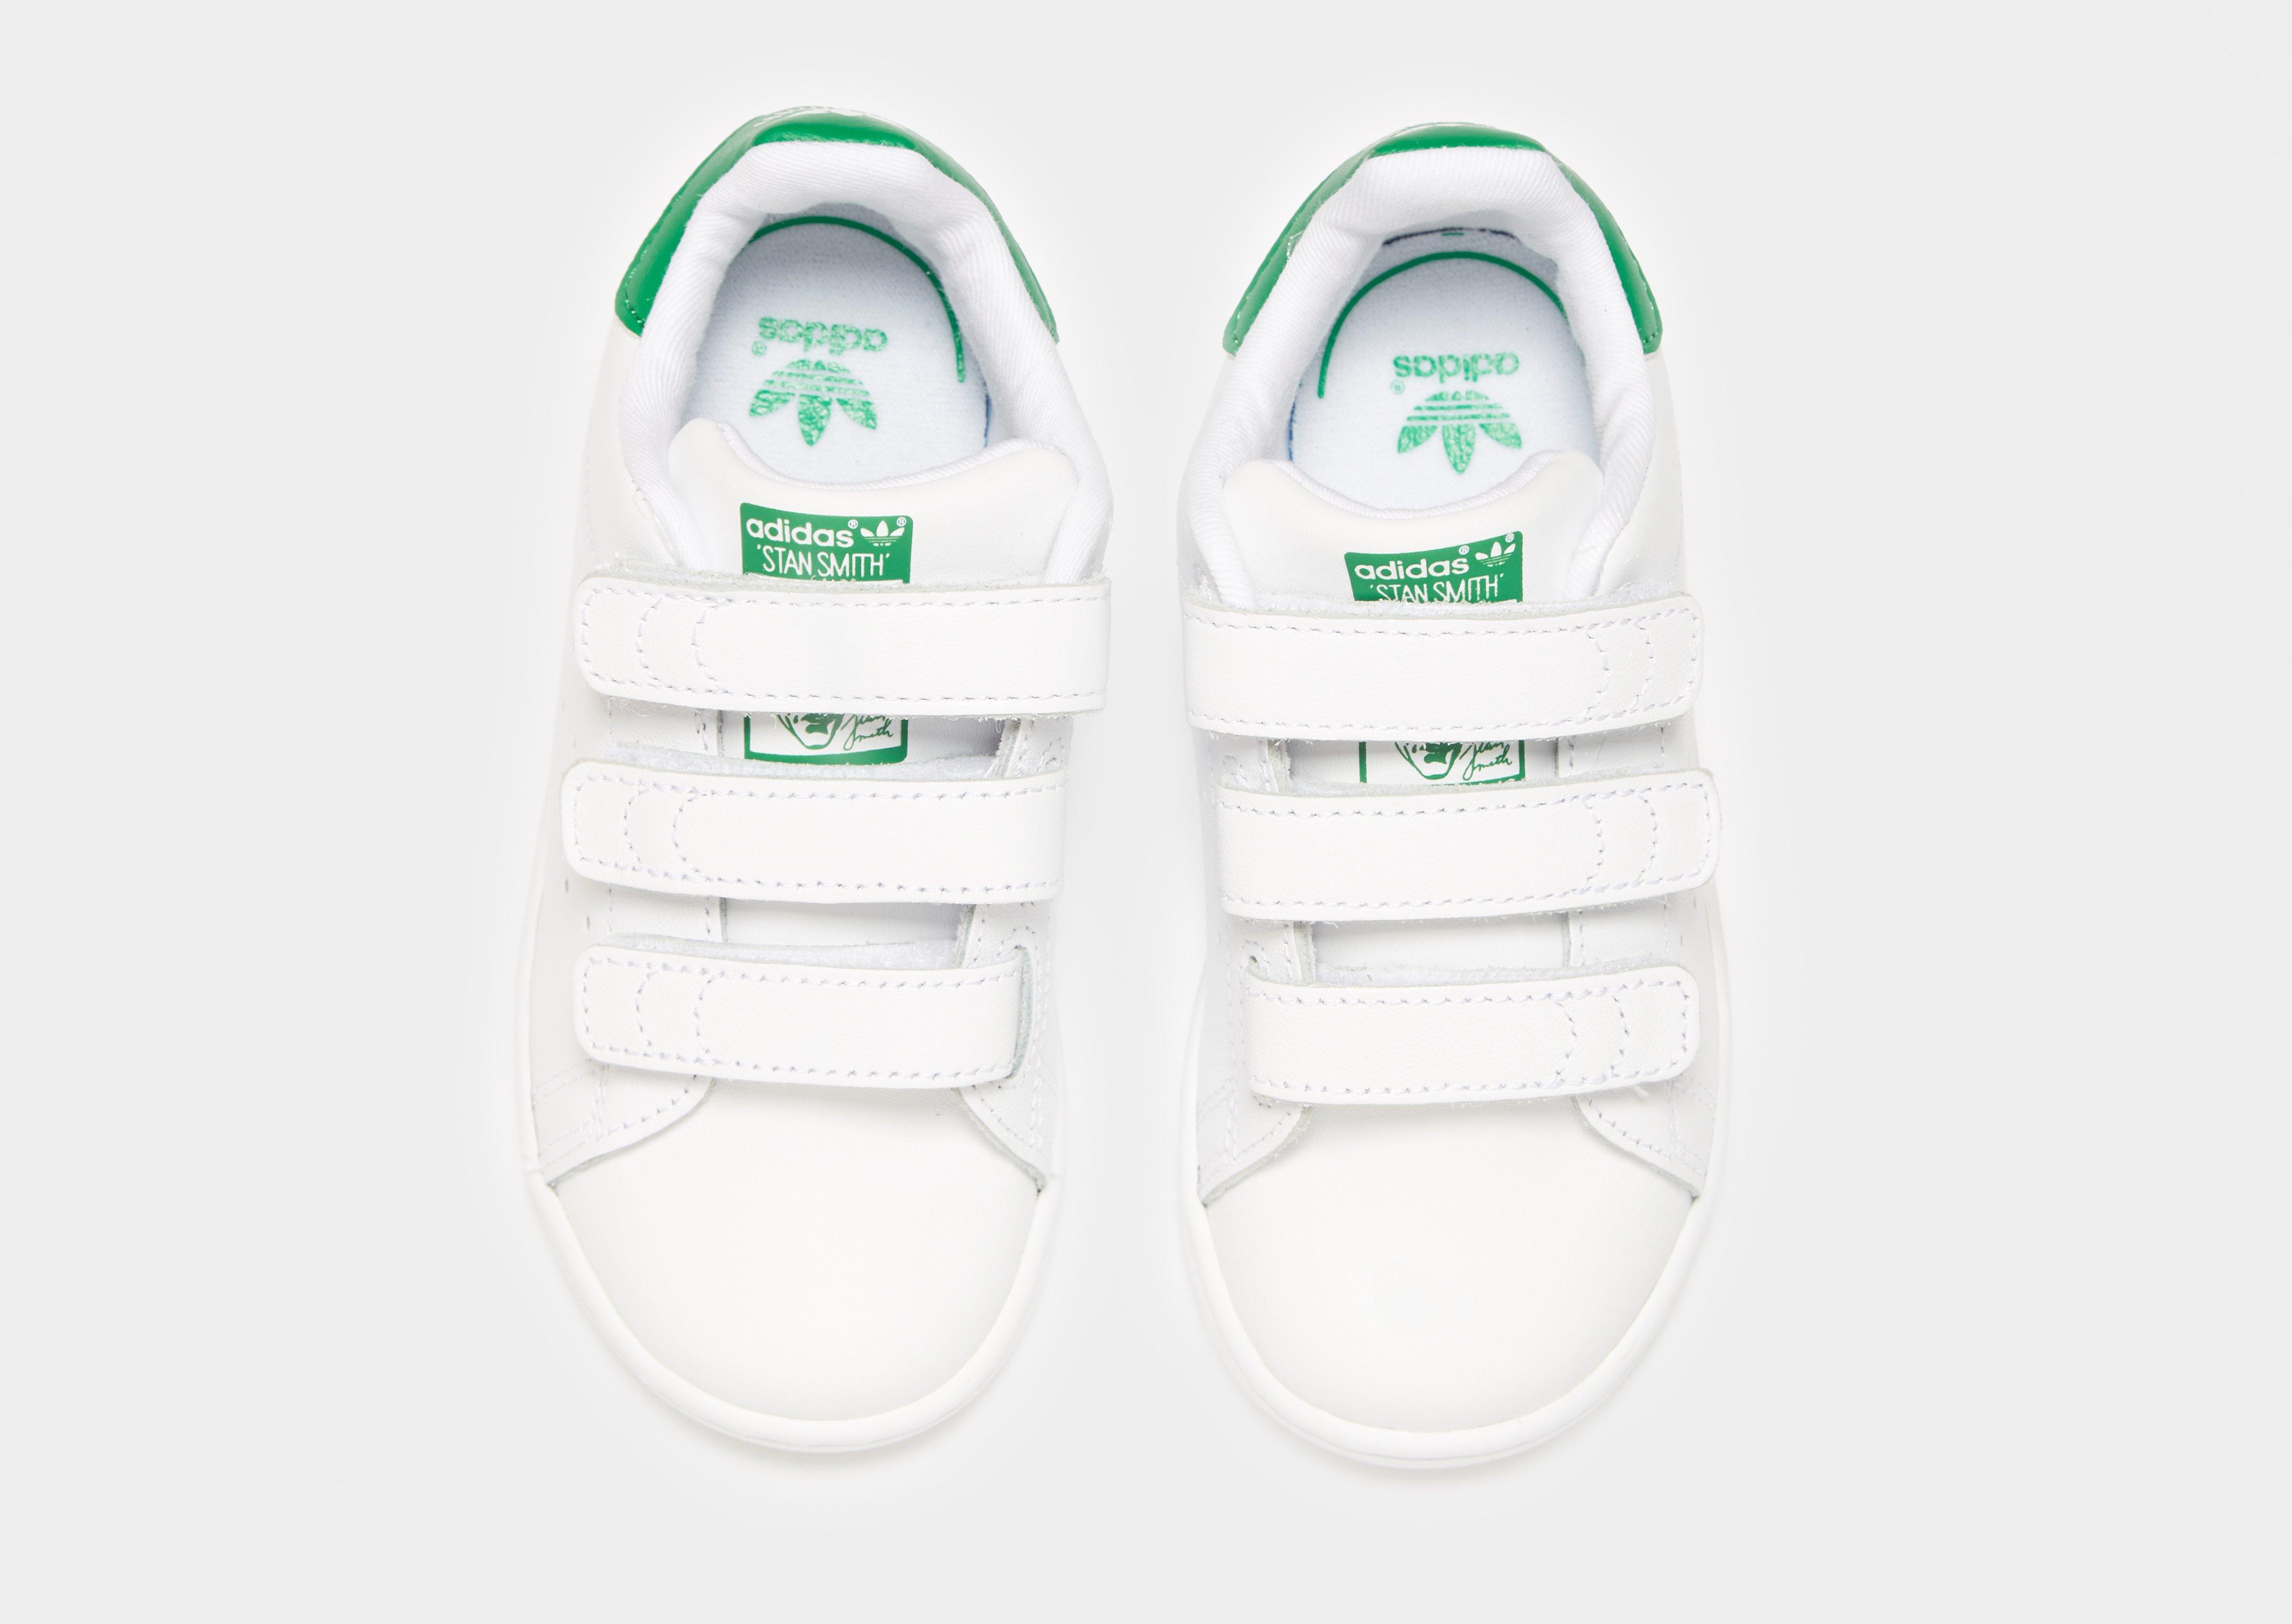 baby stan smith trainers